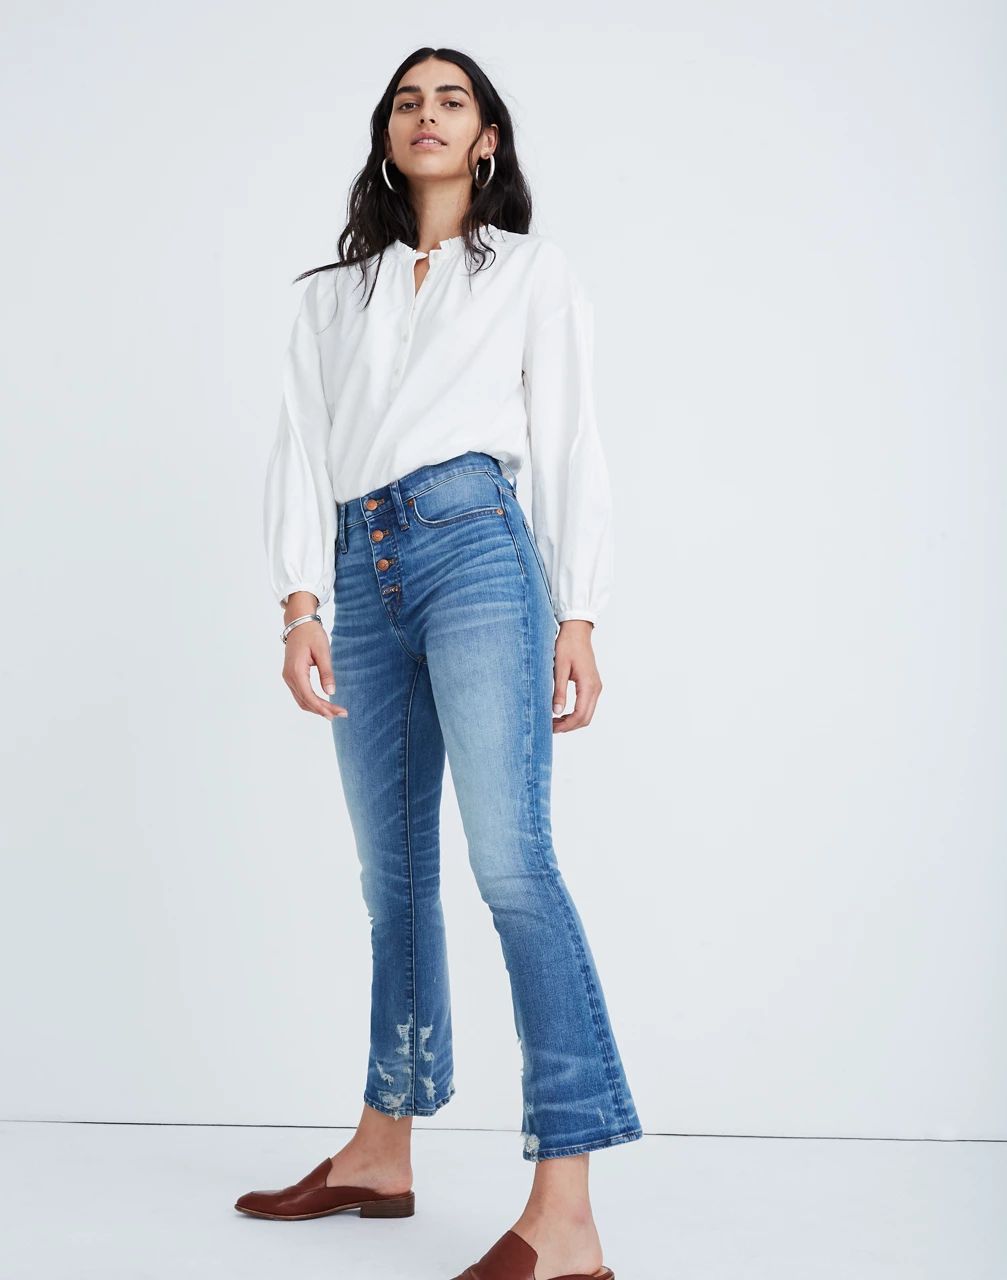 Cali Demi-Boot Jeans in Bess Wash: Button-Front Edition | Madewell